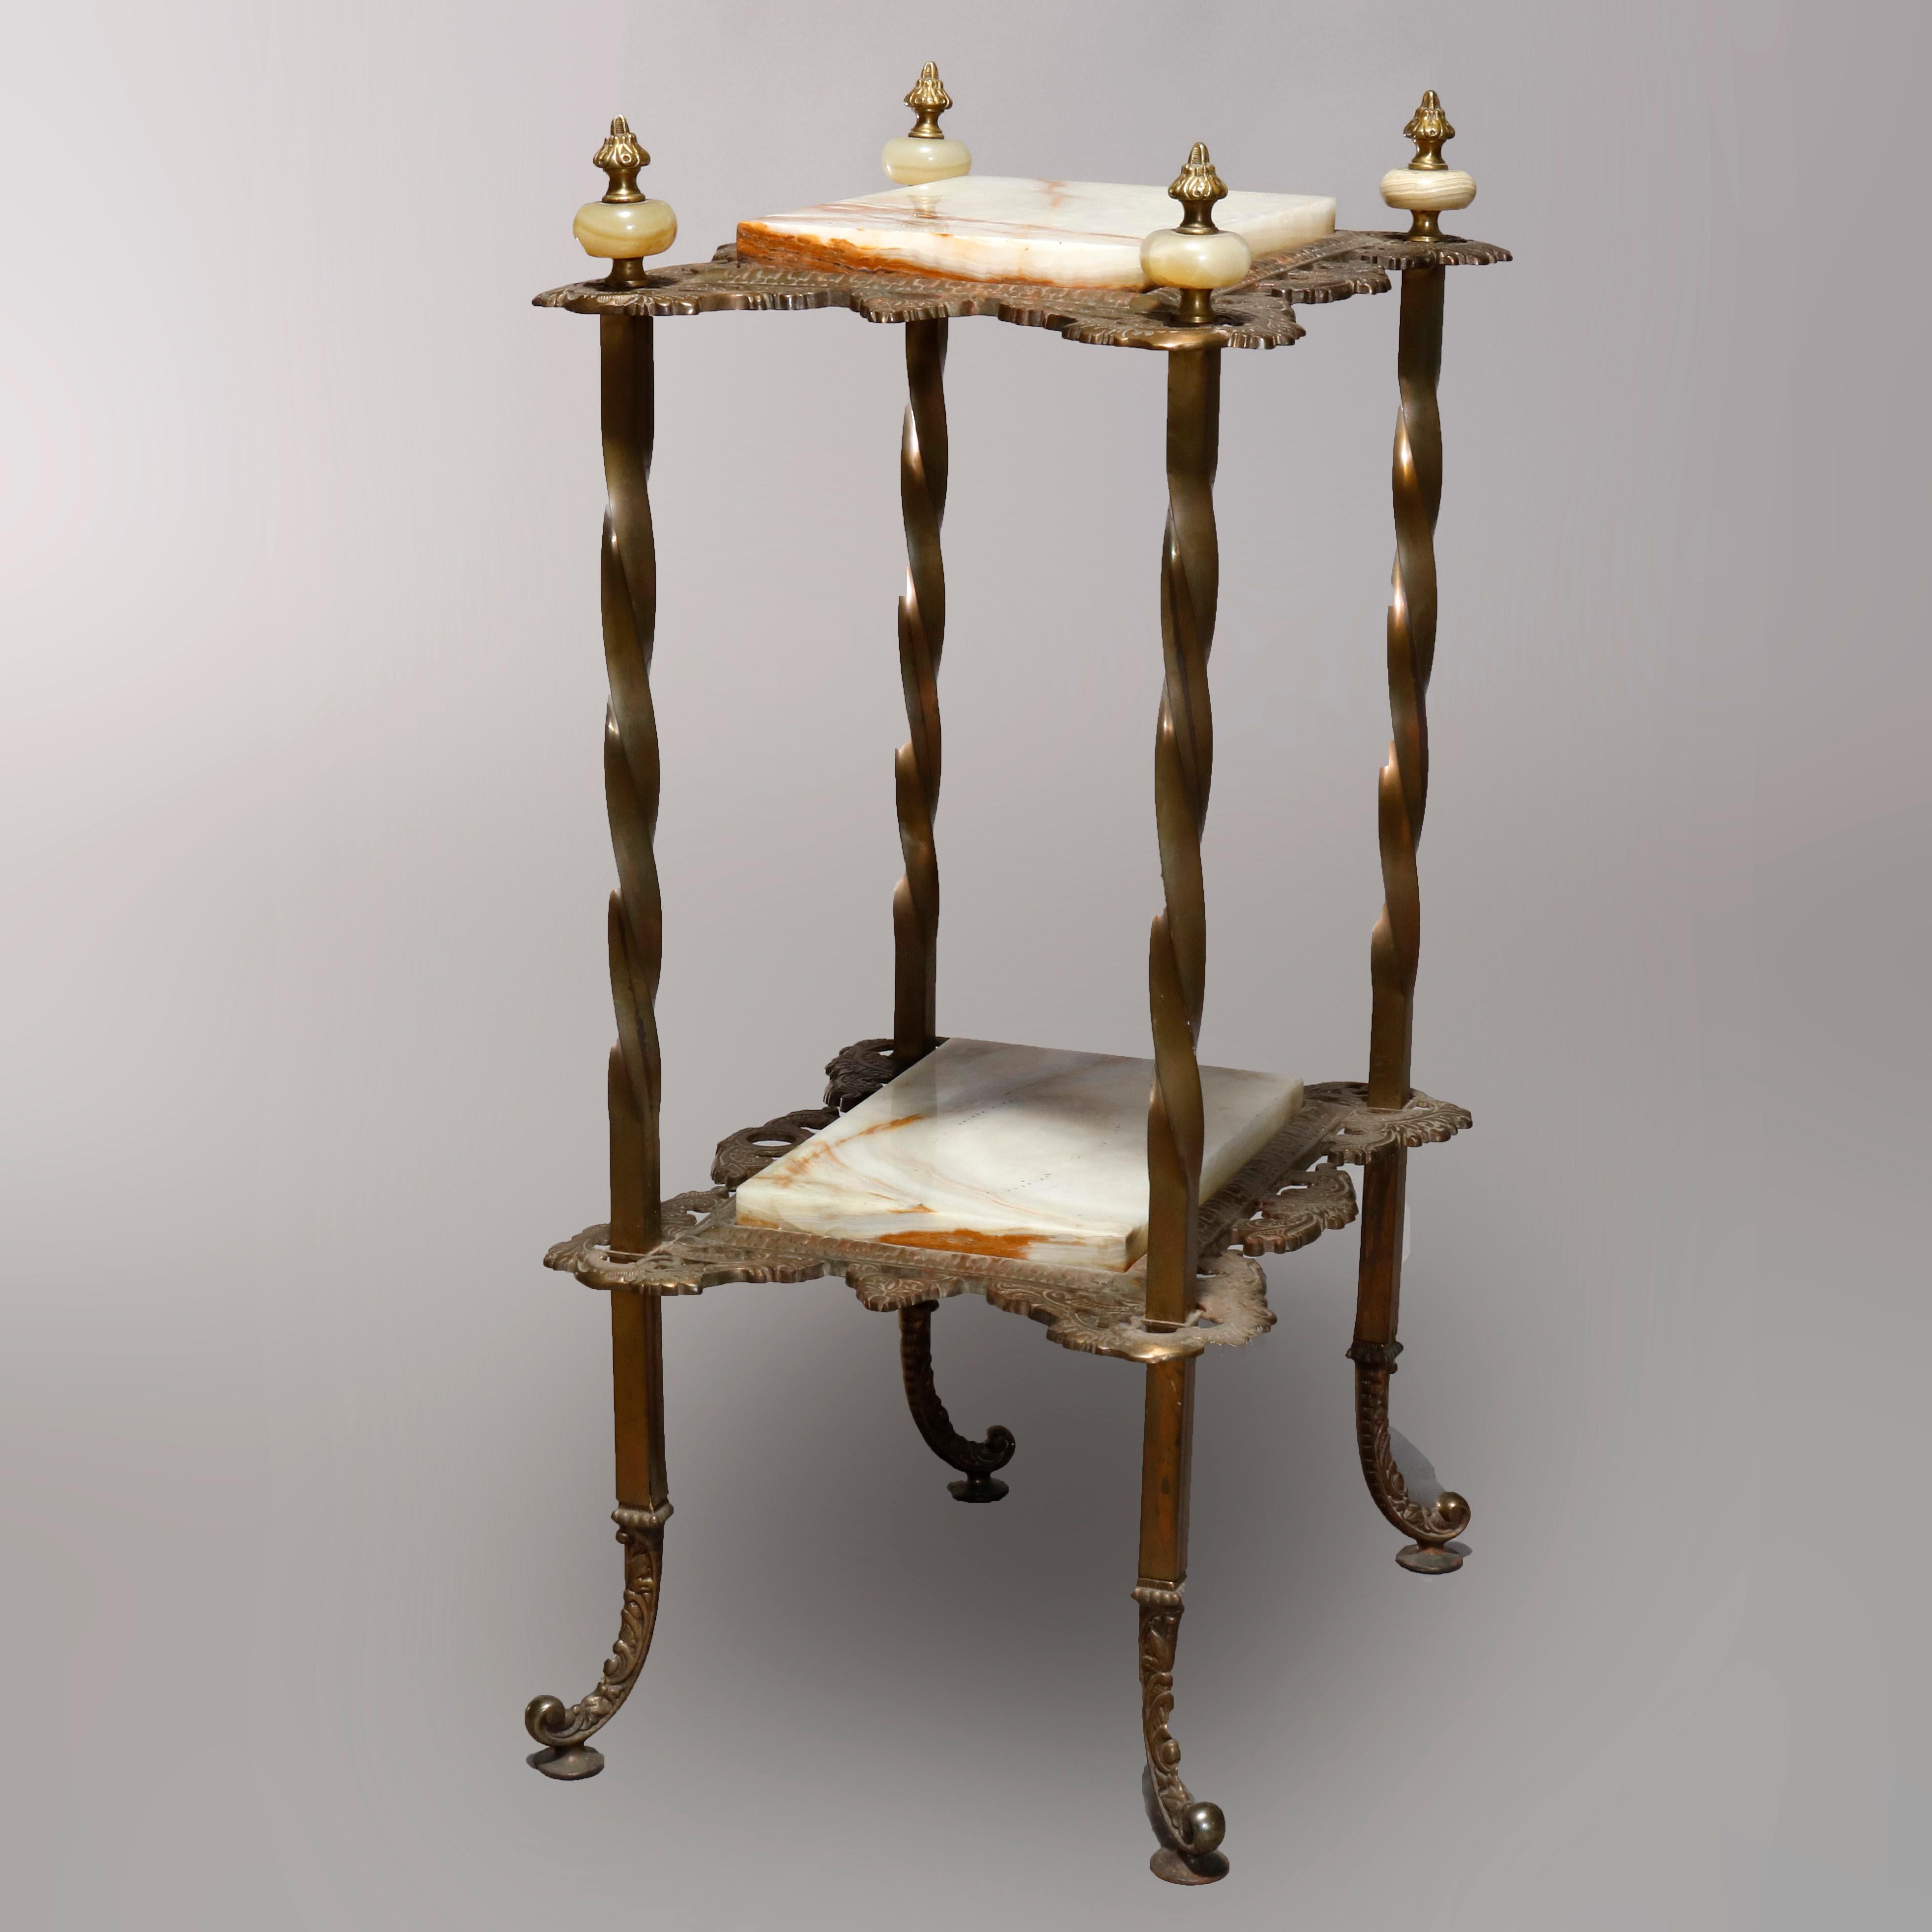 An antique French Victorian plant stand offers bronze frame with twisted columns having tiered pierced foliate cast trays housing onyx shelves, circa 1880.

Measures: 32